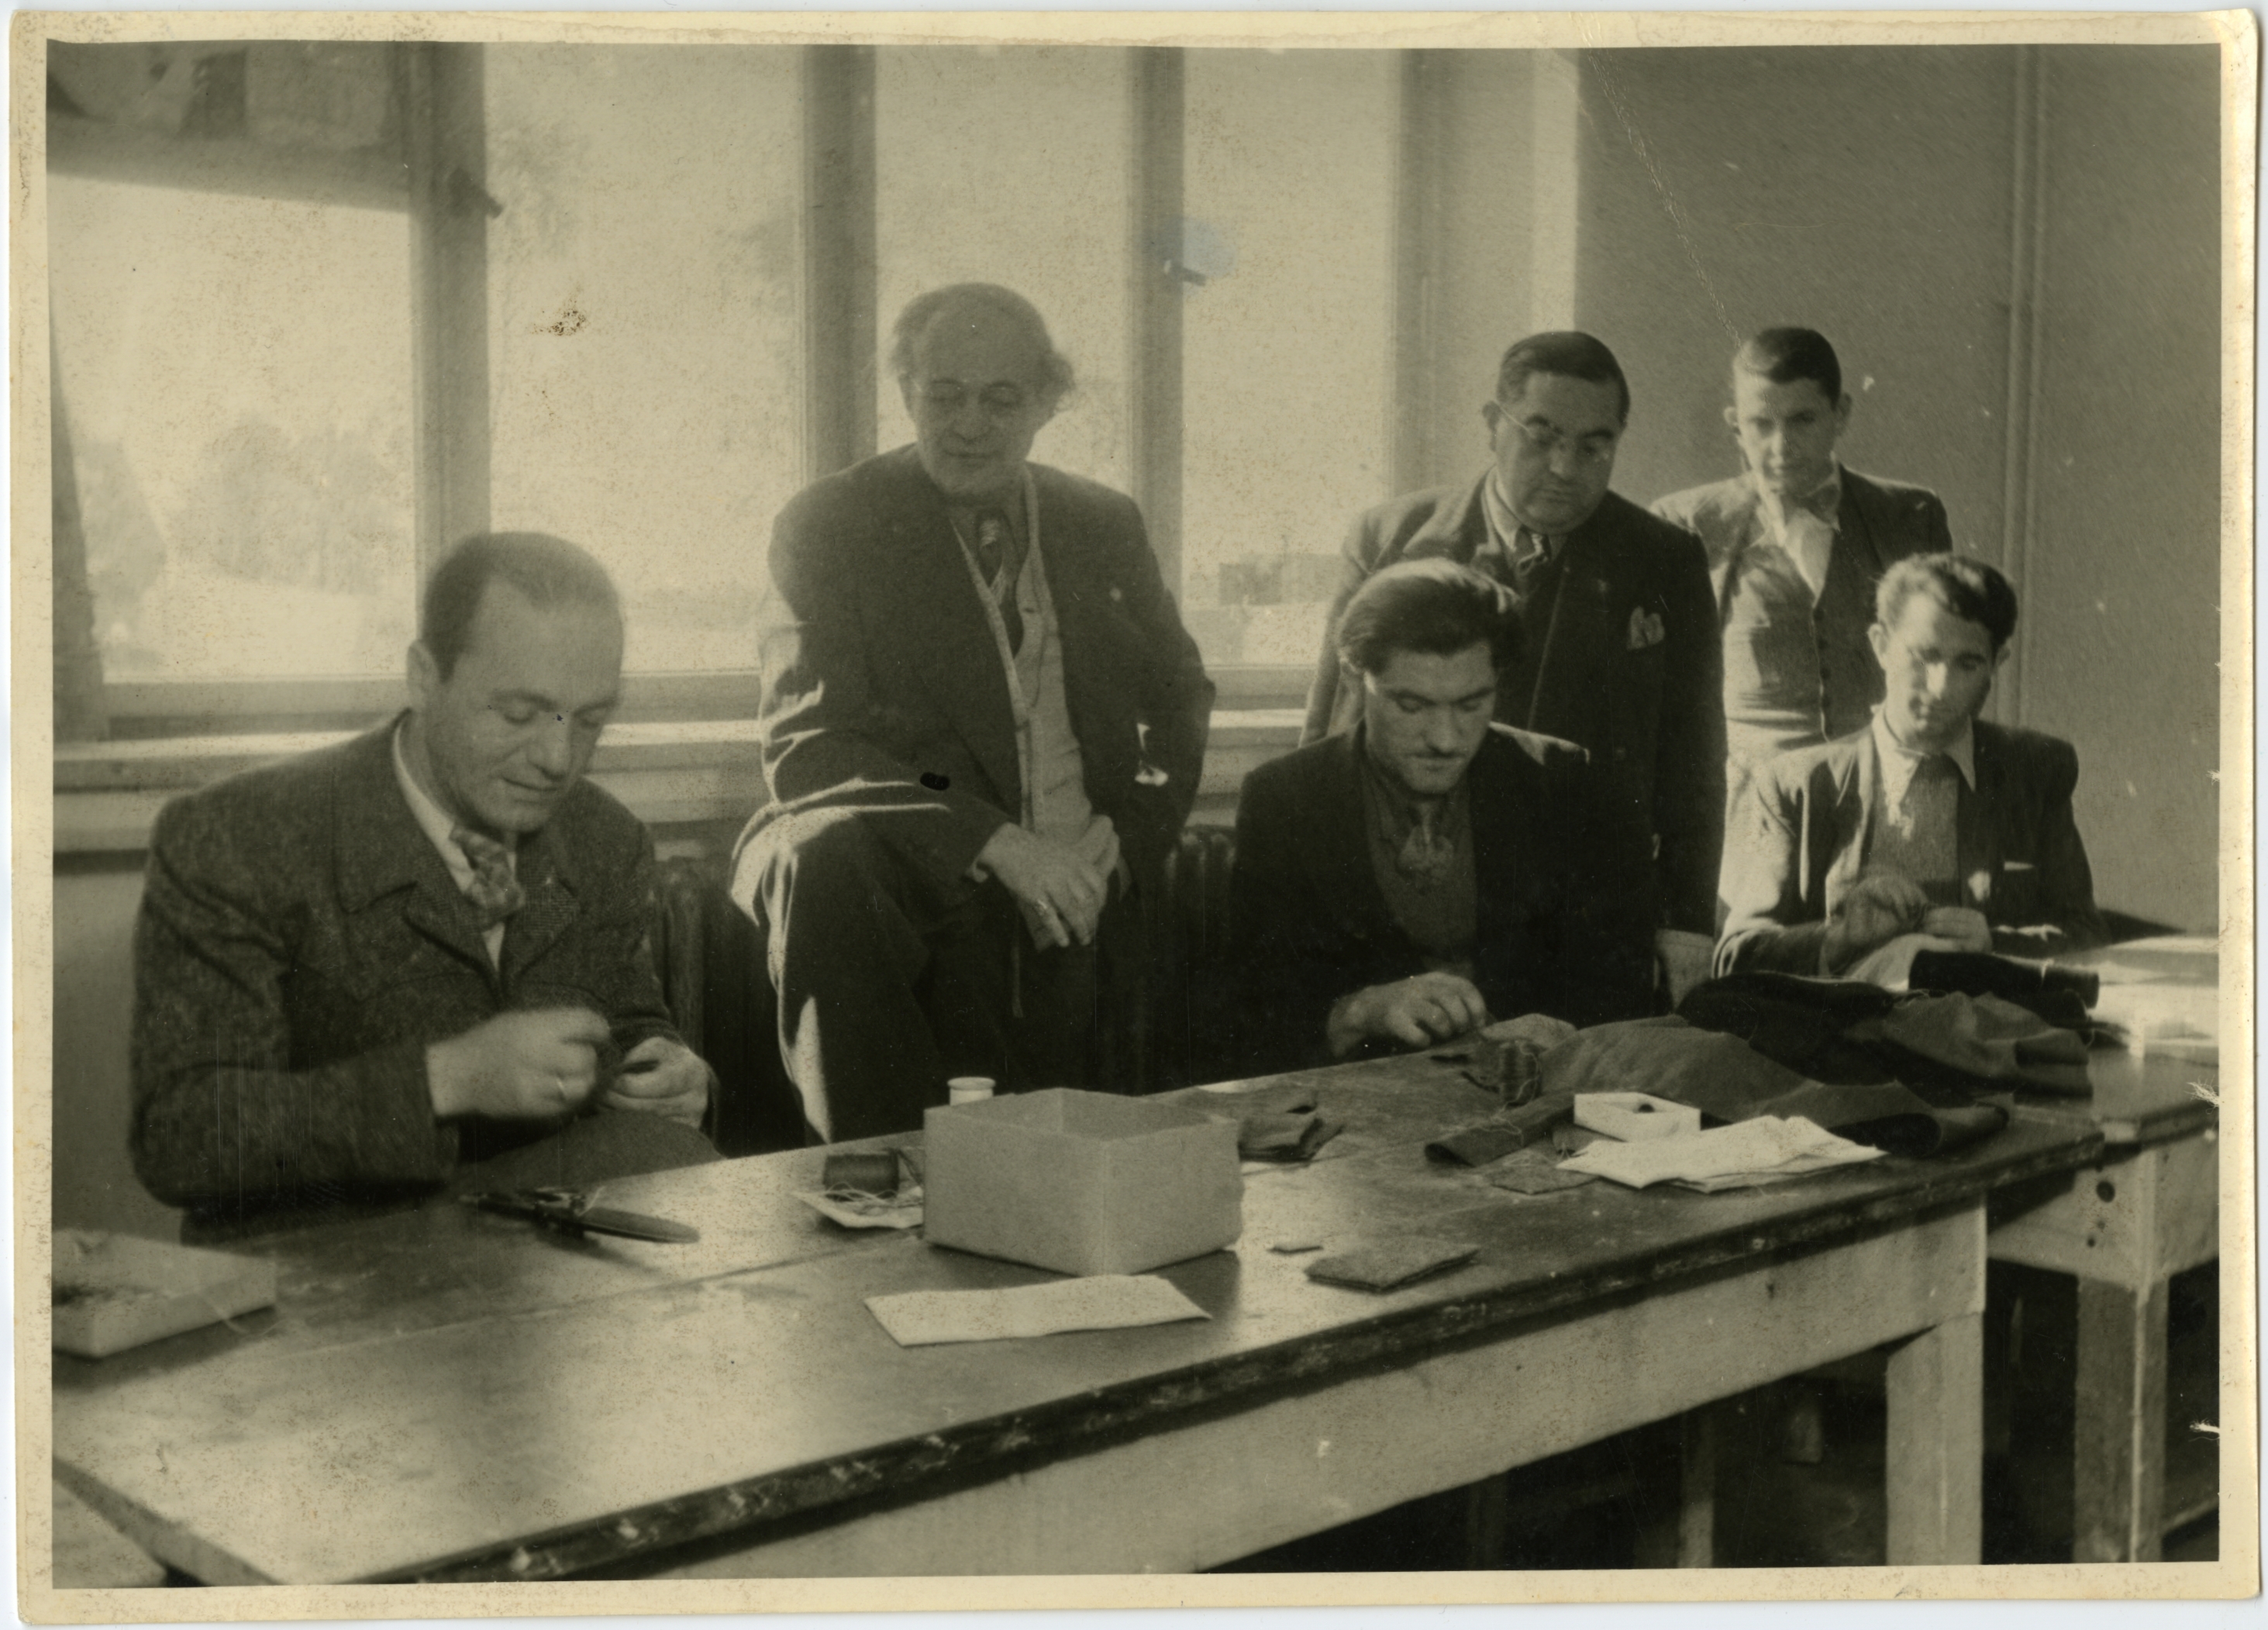 Testing at Bergen Belsen Displaced Persons Camp, 1947. Tailor Project photos, 1947. Ontario Jewish Archives, Blankenstein Family Heritage Centre, fonds 70, file 5, item 4.